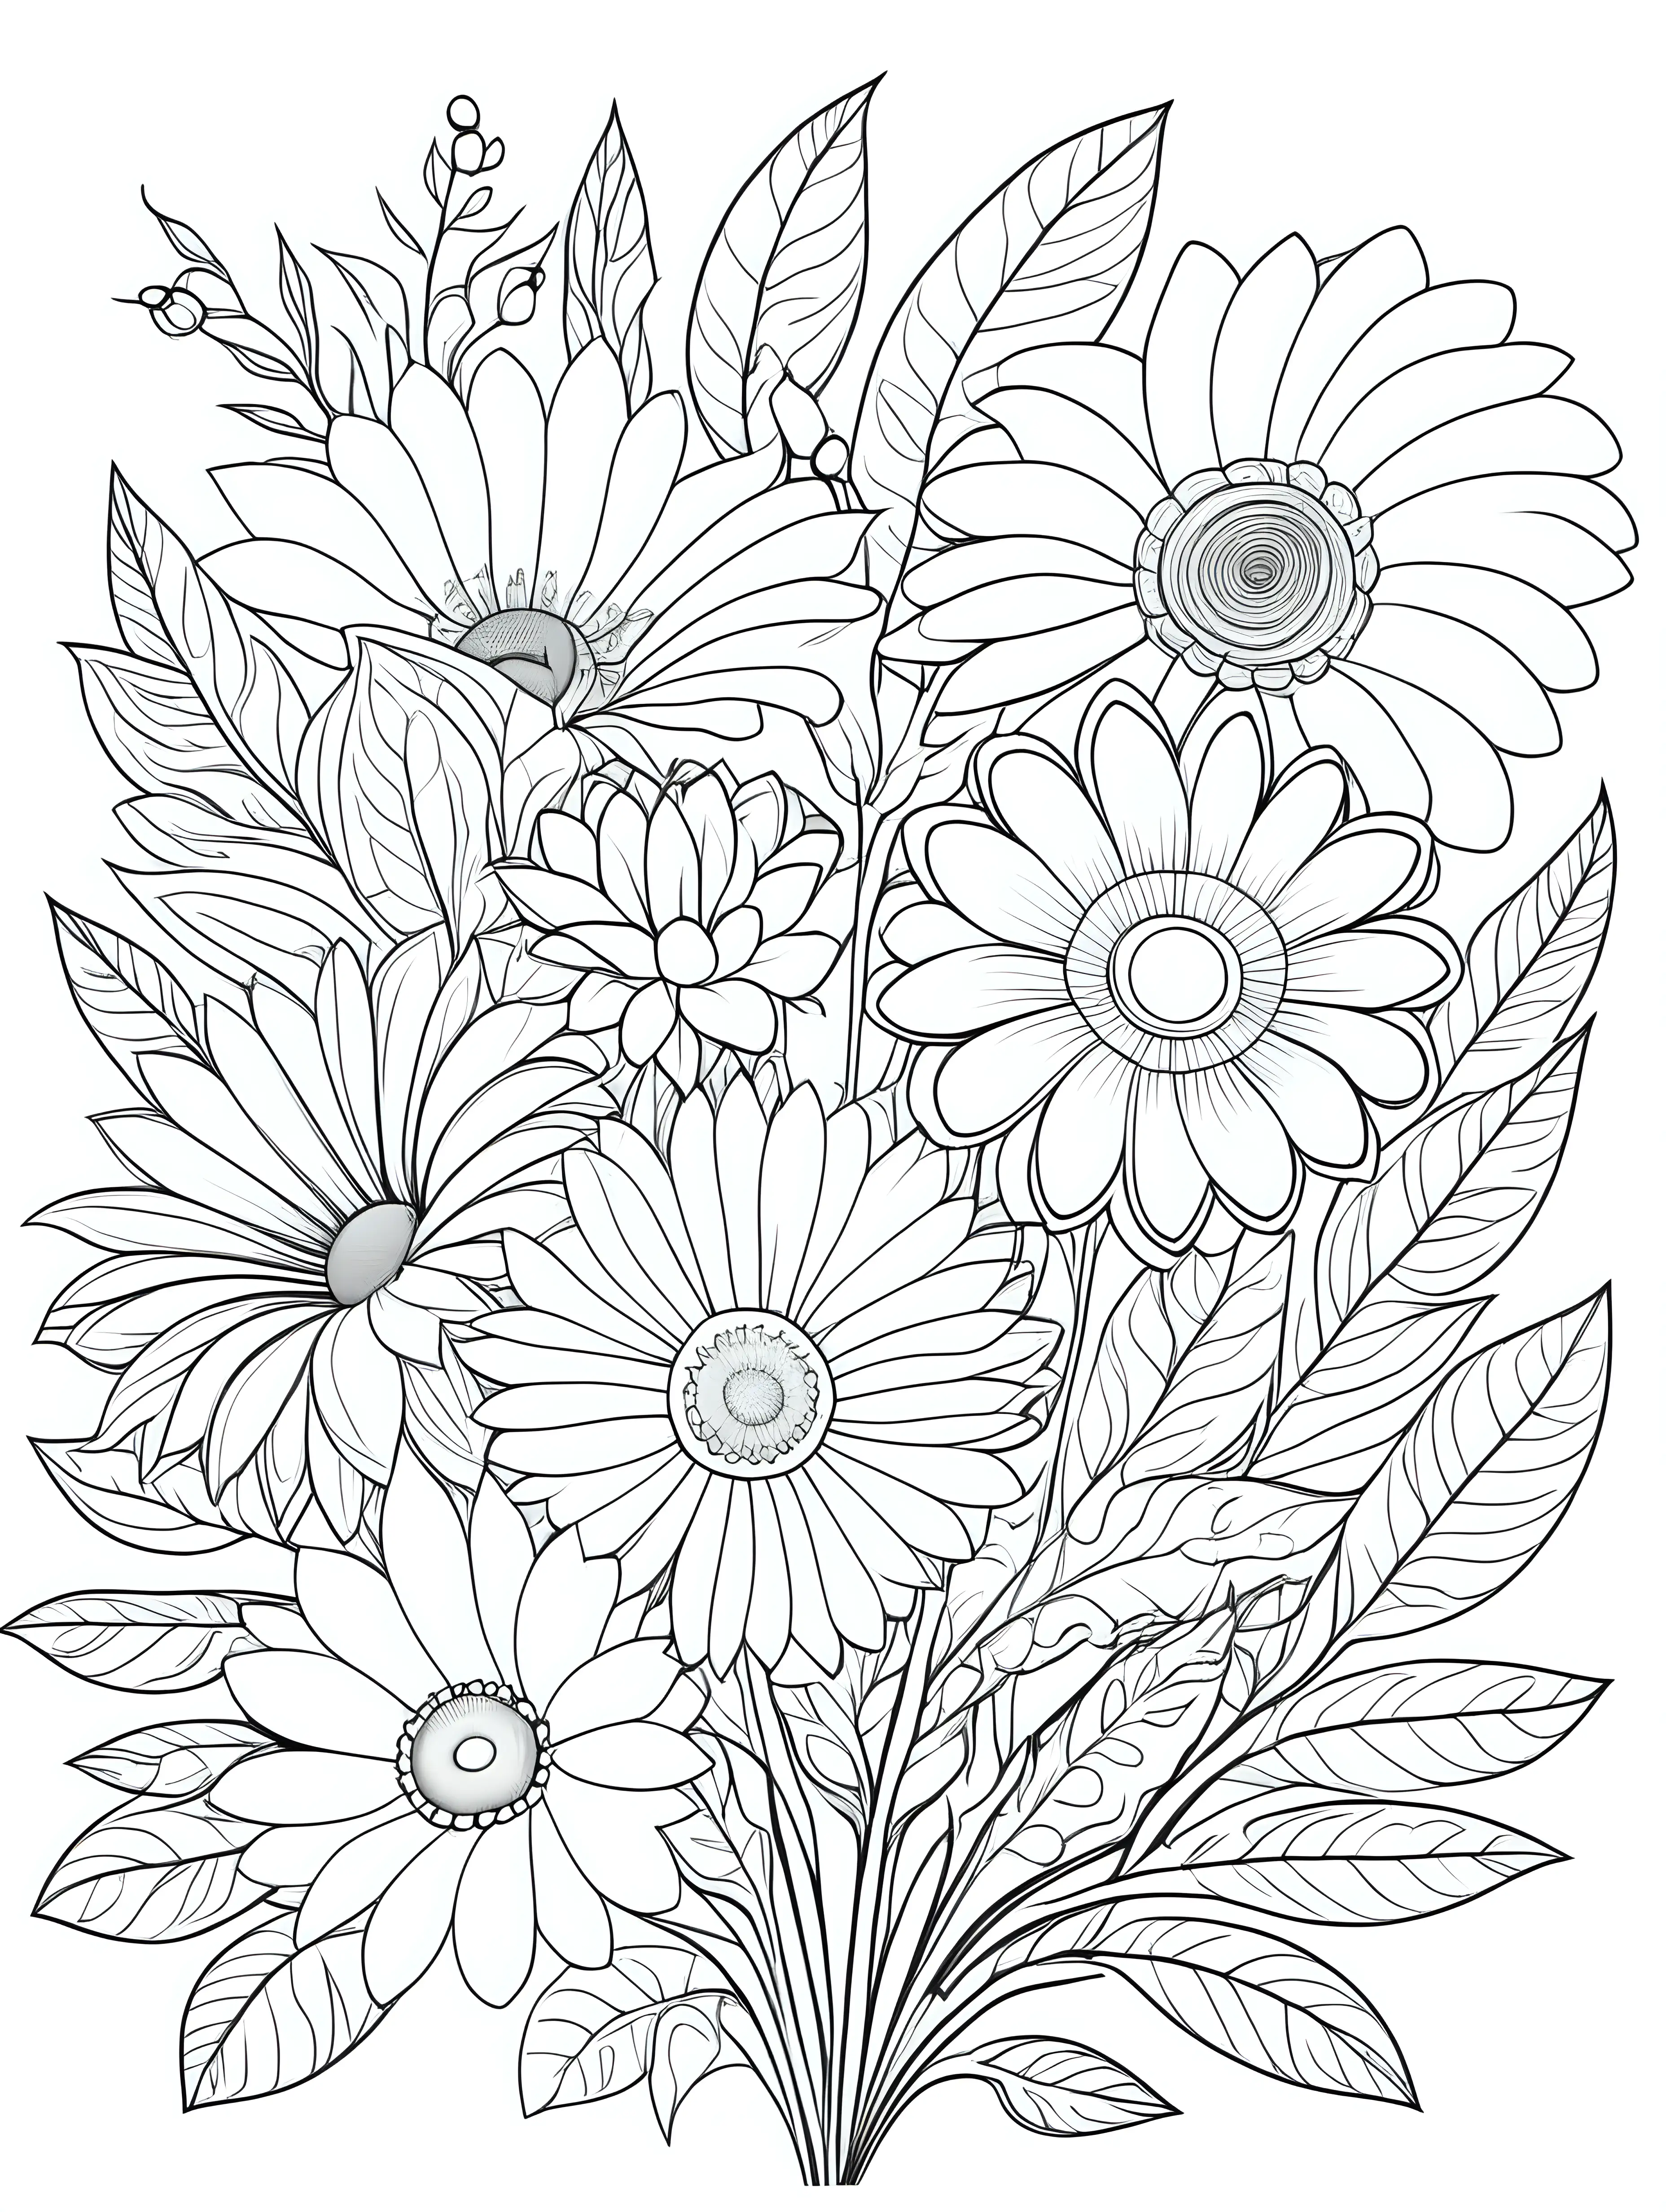 clean black and white, white background, adult coloring book style drawing, 2D, simple line drawing, vector, fill page with different types of flowers